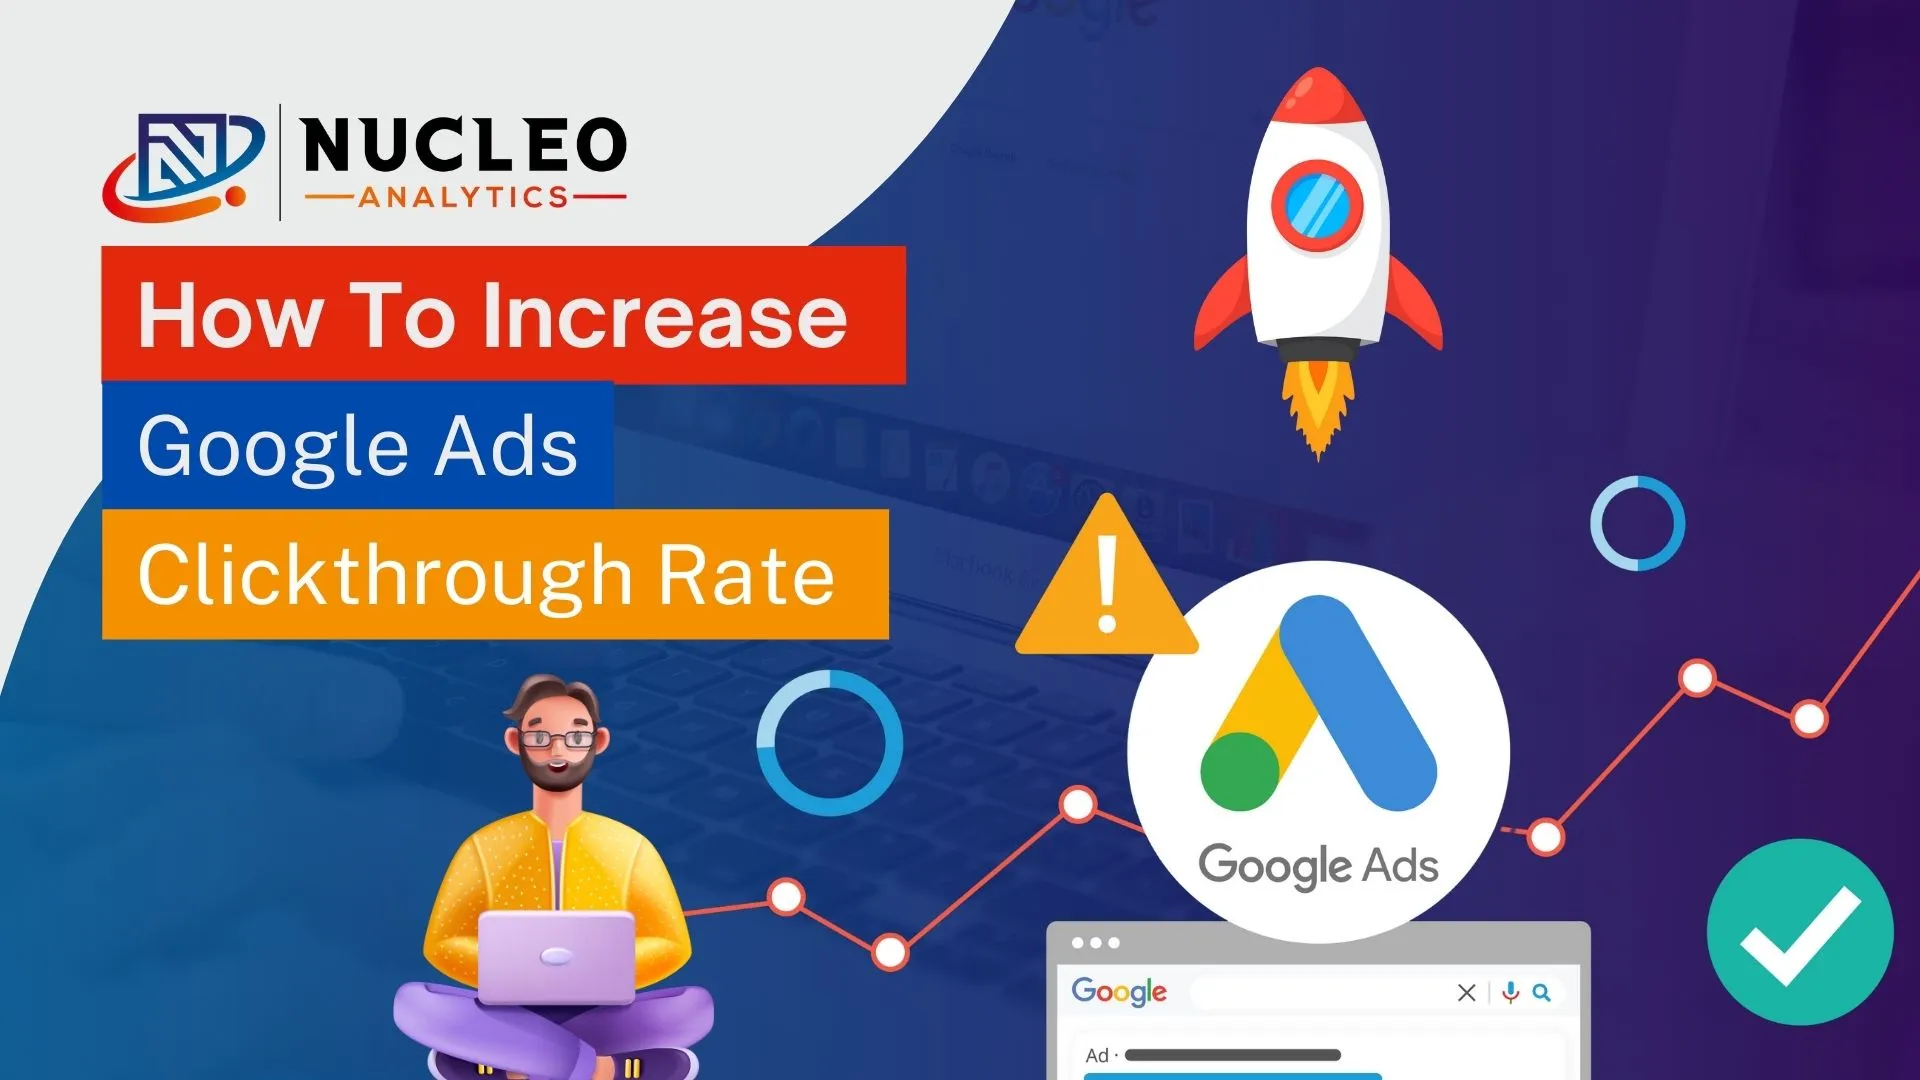 How To Increase Your Google Ads Click through Rate (CTR)?